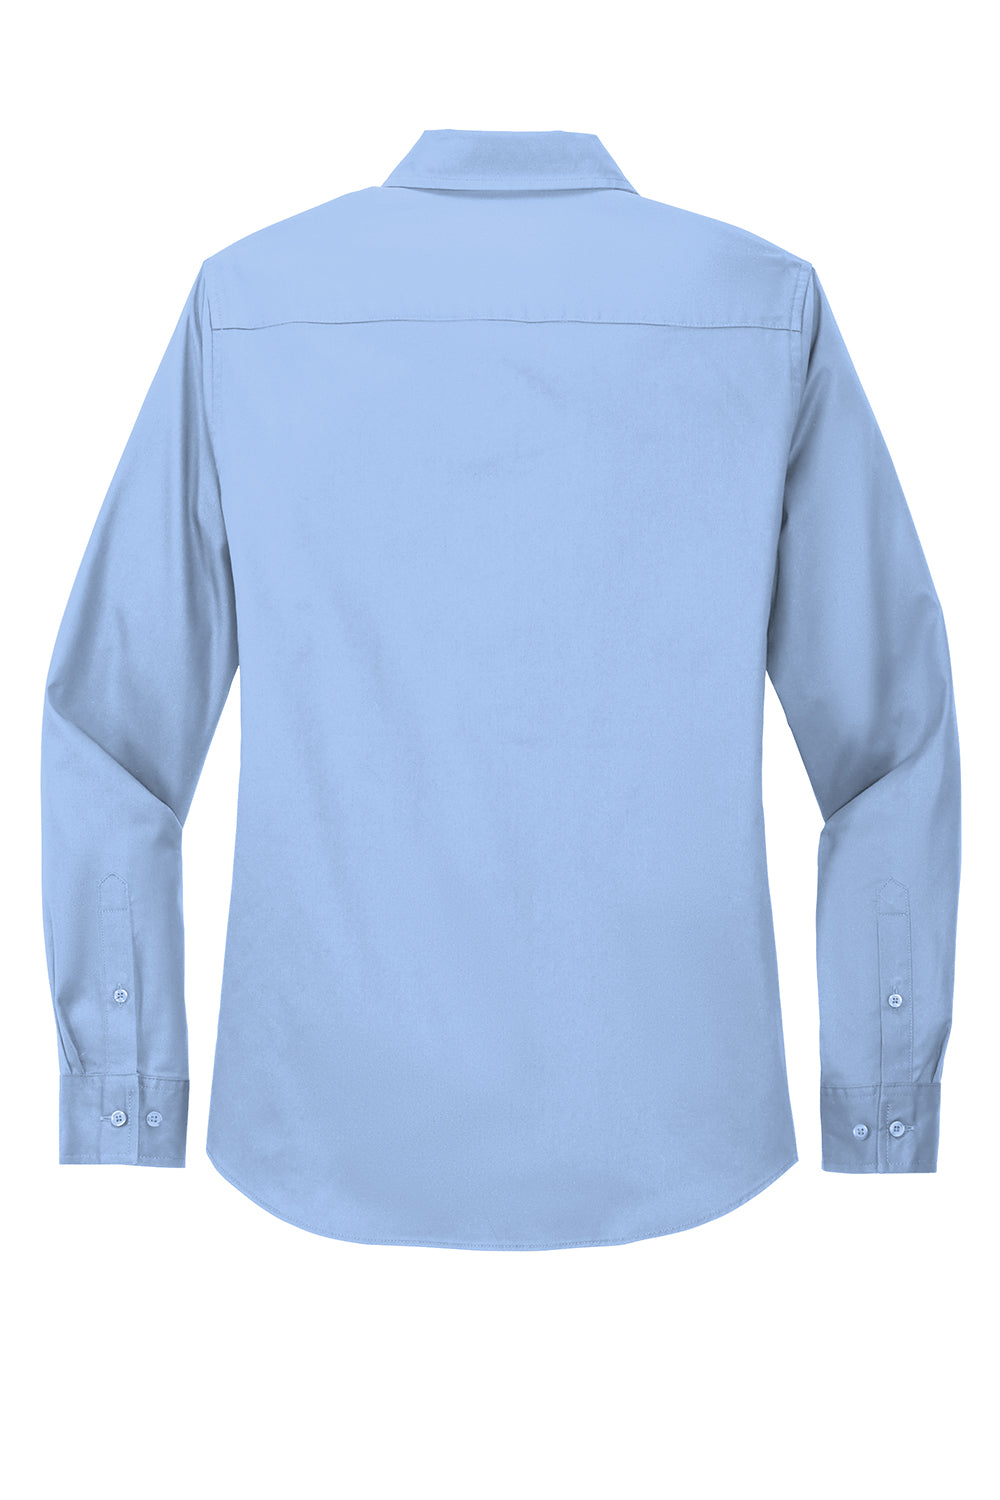 Port Authority L608 Womens Easy Care Wrinkle Resistant Long Sleeve Button Down Shirt Light Blue Flat Back